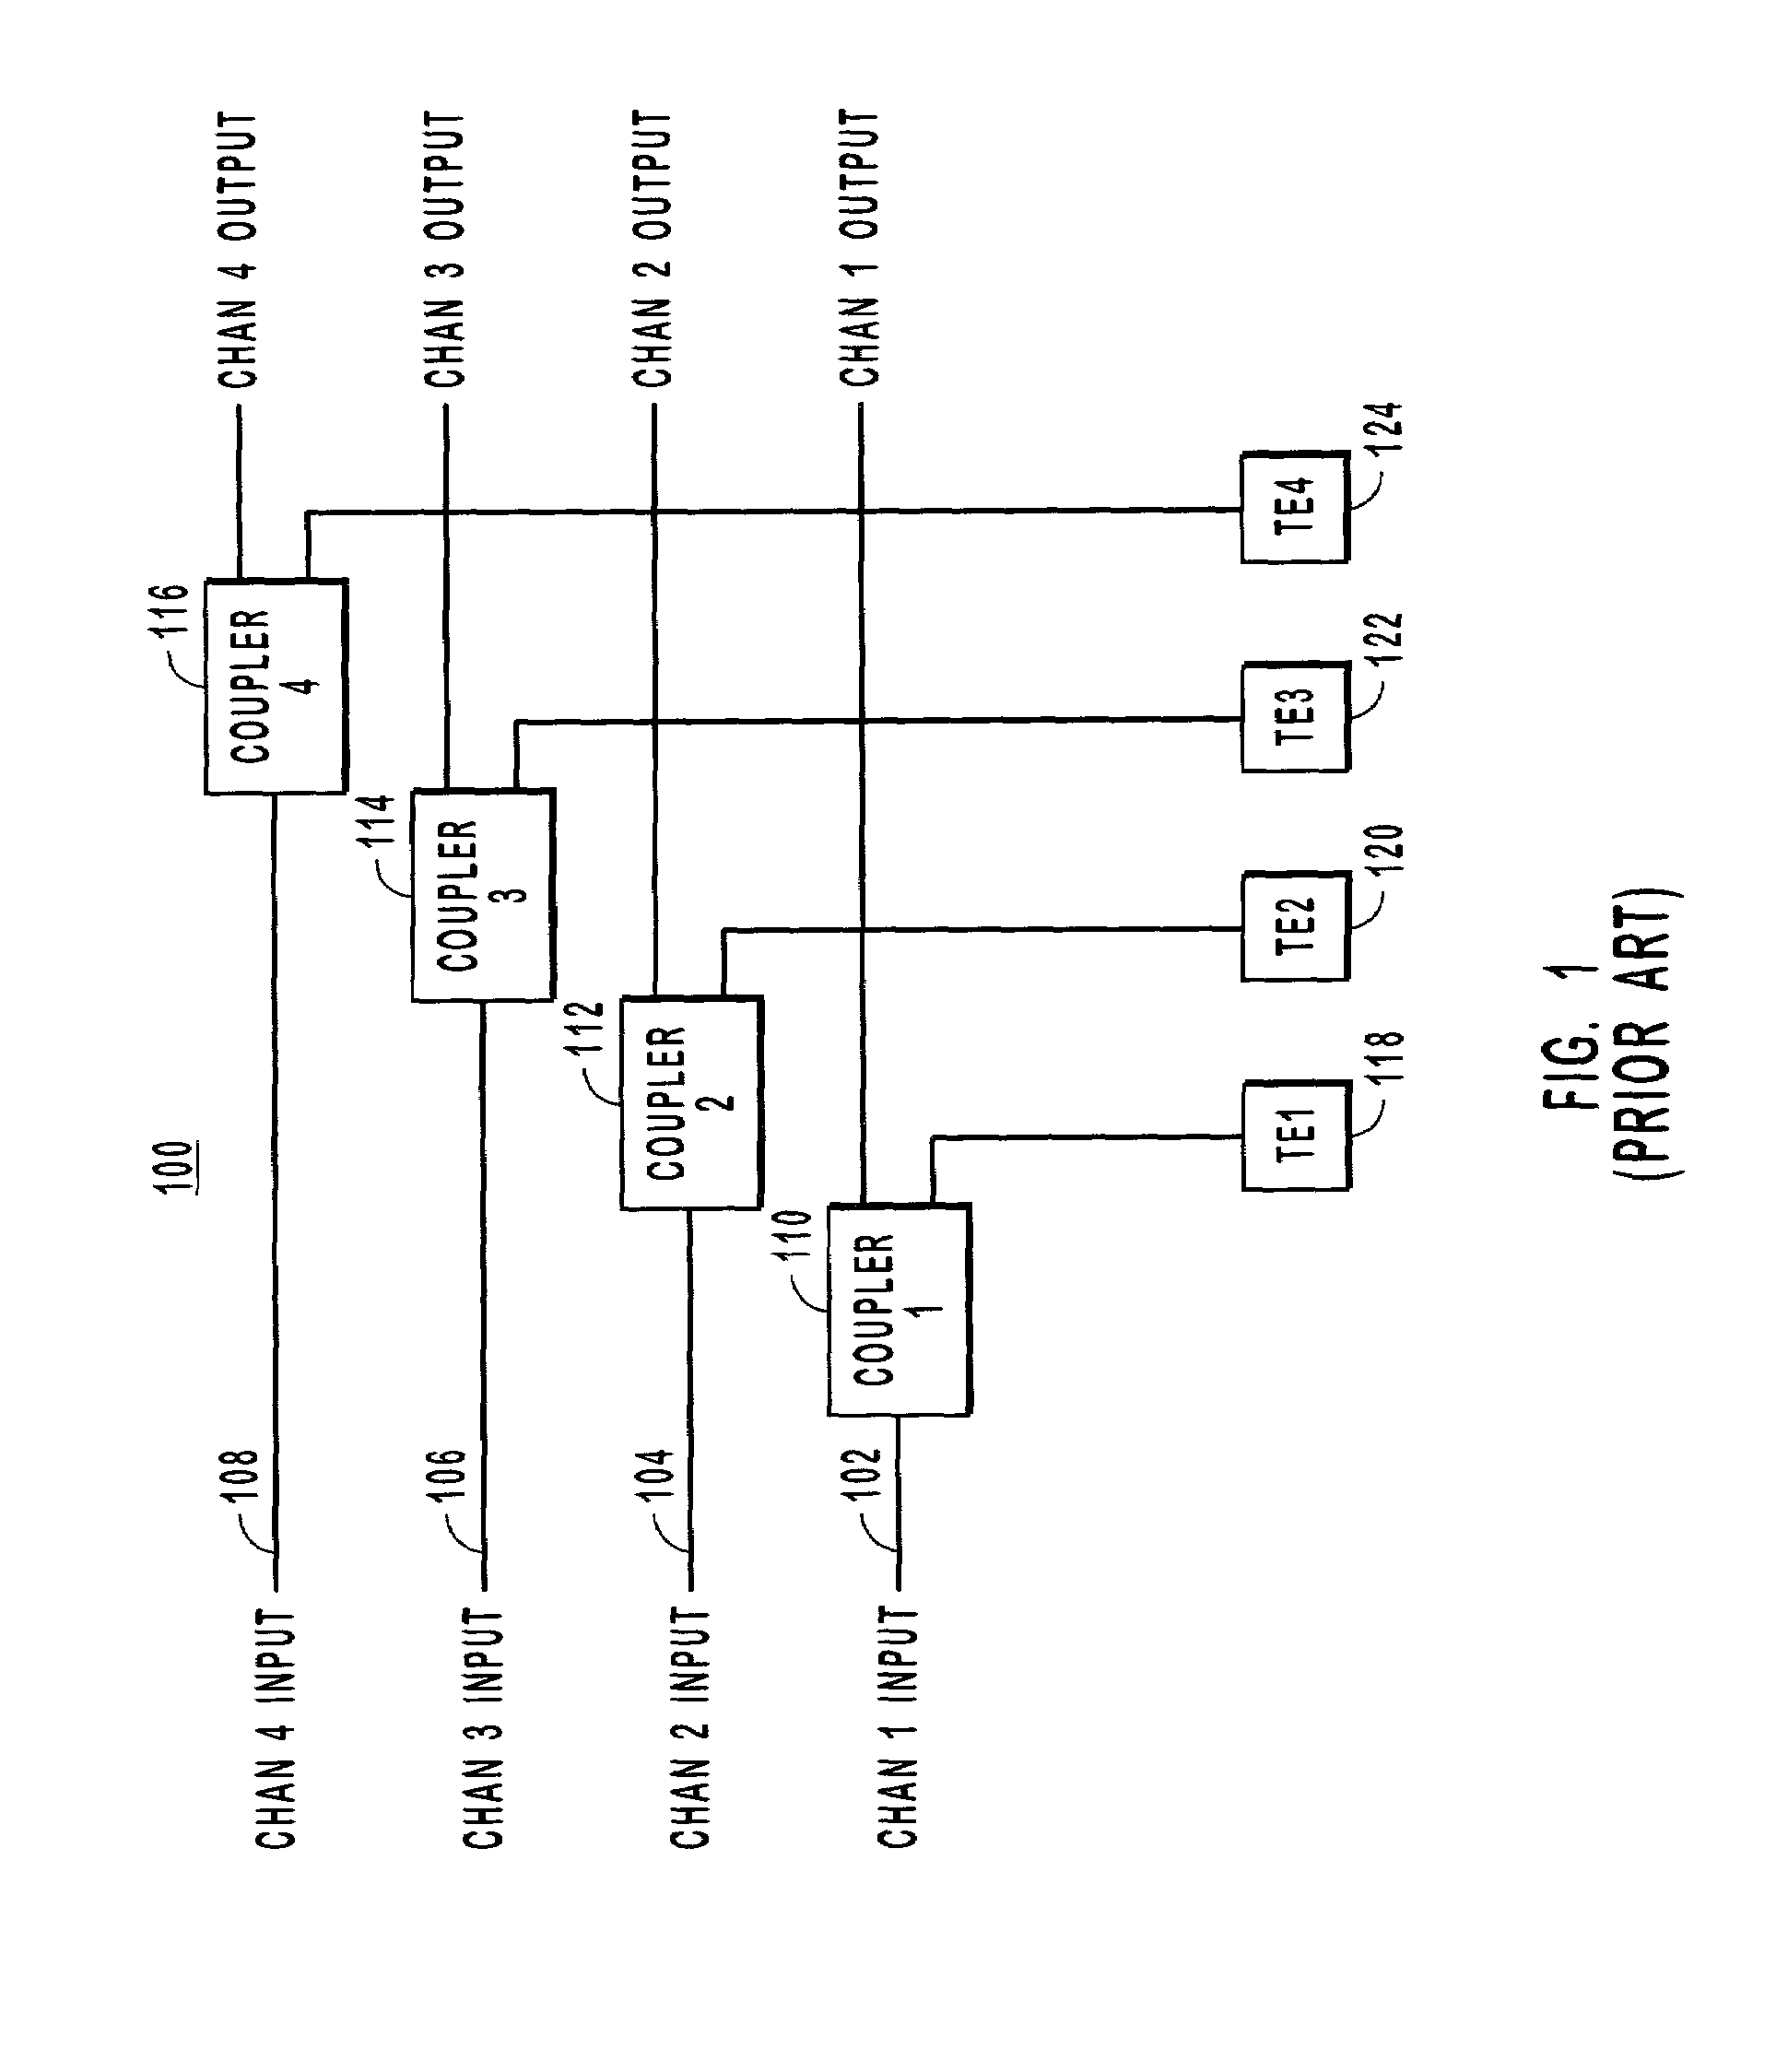 Optical channel selection and evaluation system